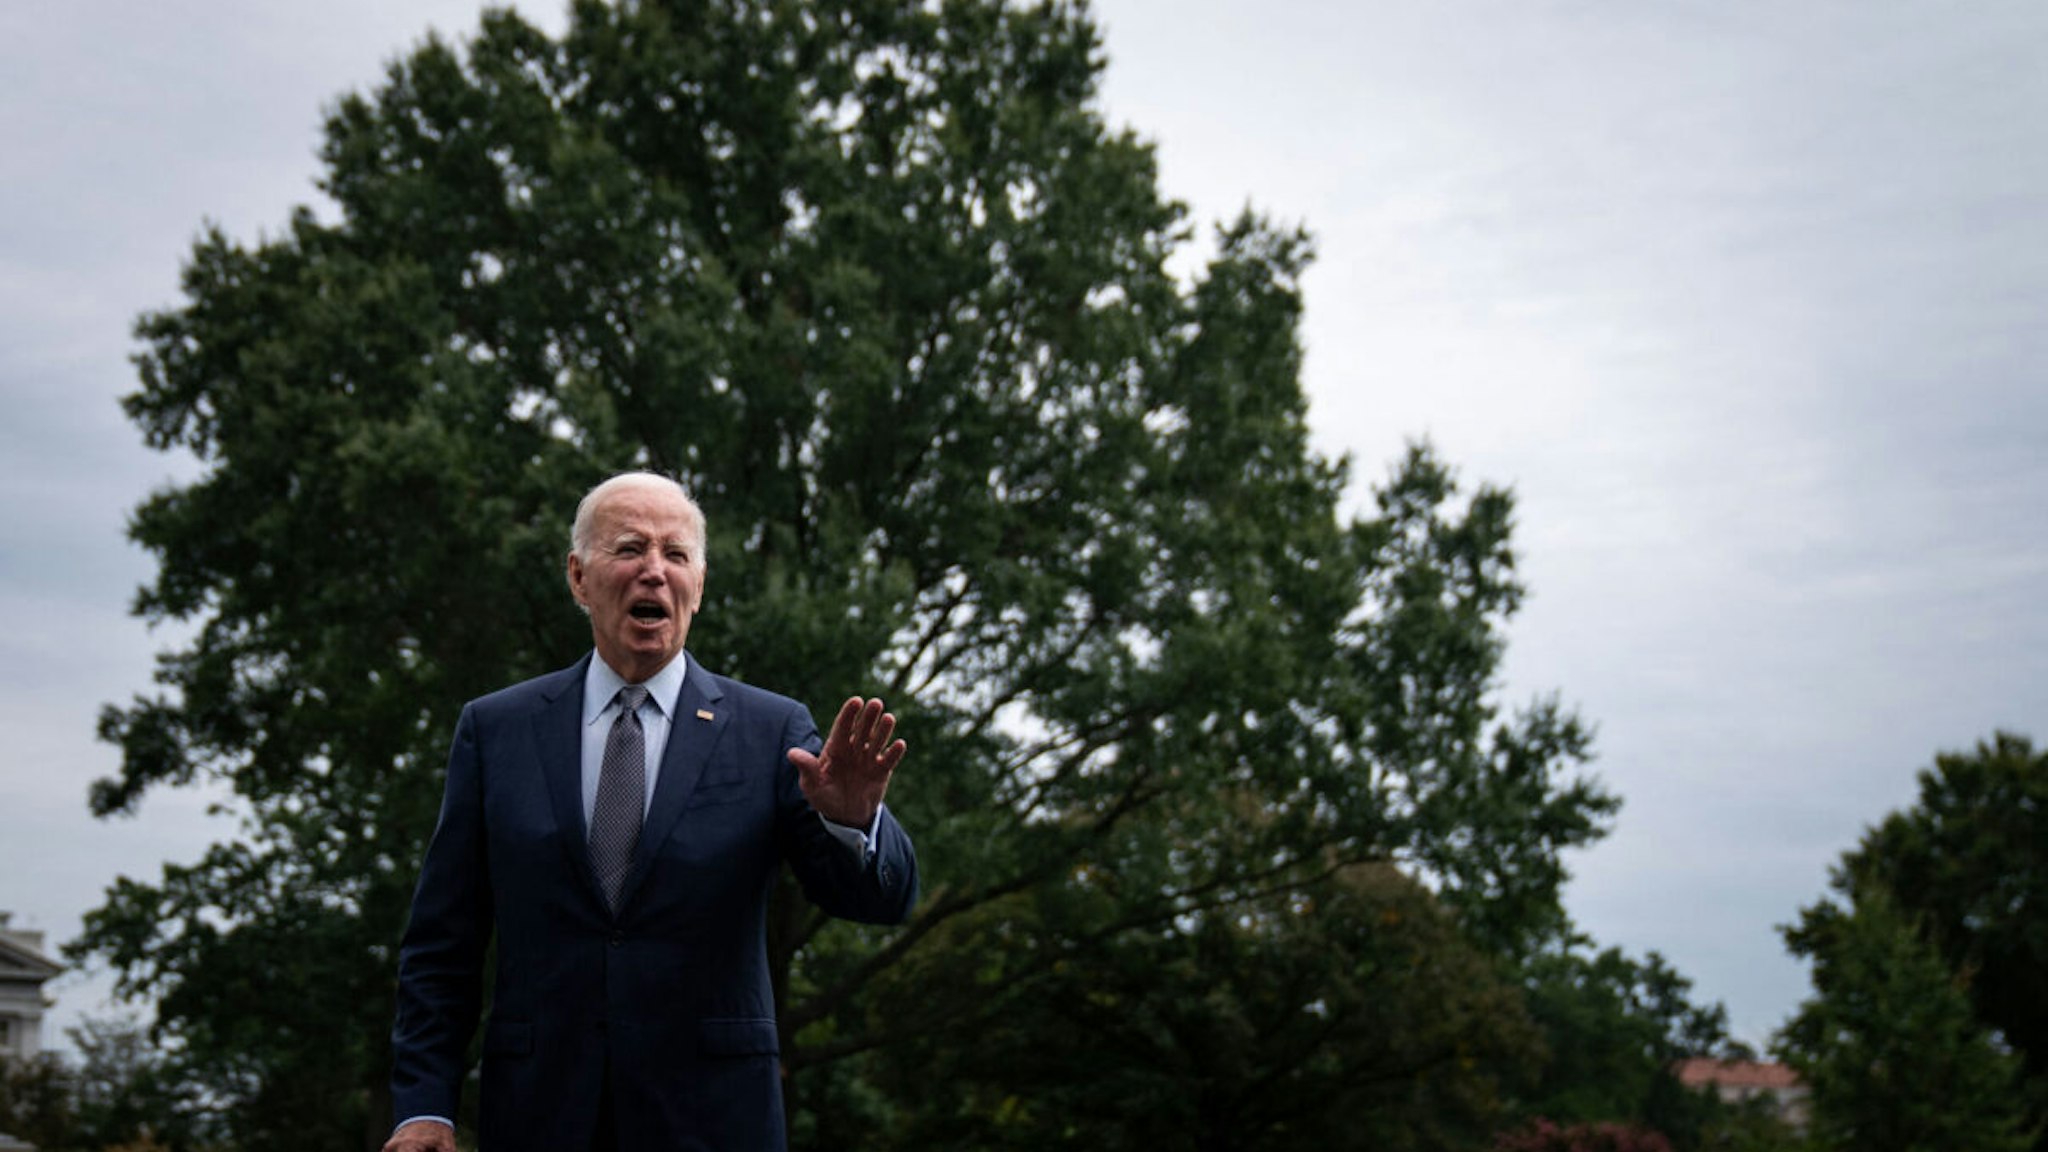 US President Joe Biden returns to the White House after disembarking from Marine One at the South Lawn of the White House on September, 17, 2023 in Washington, DC.